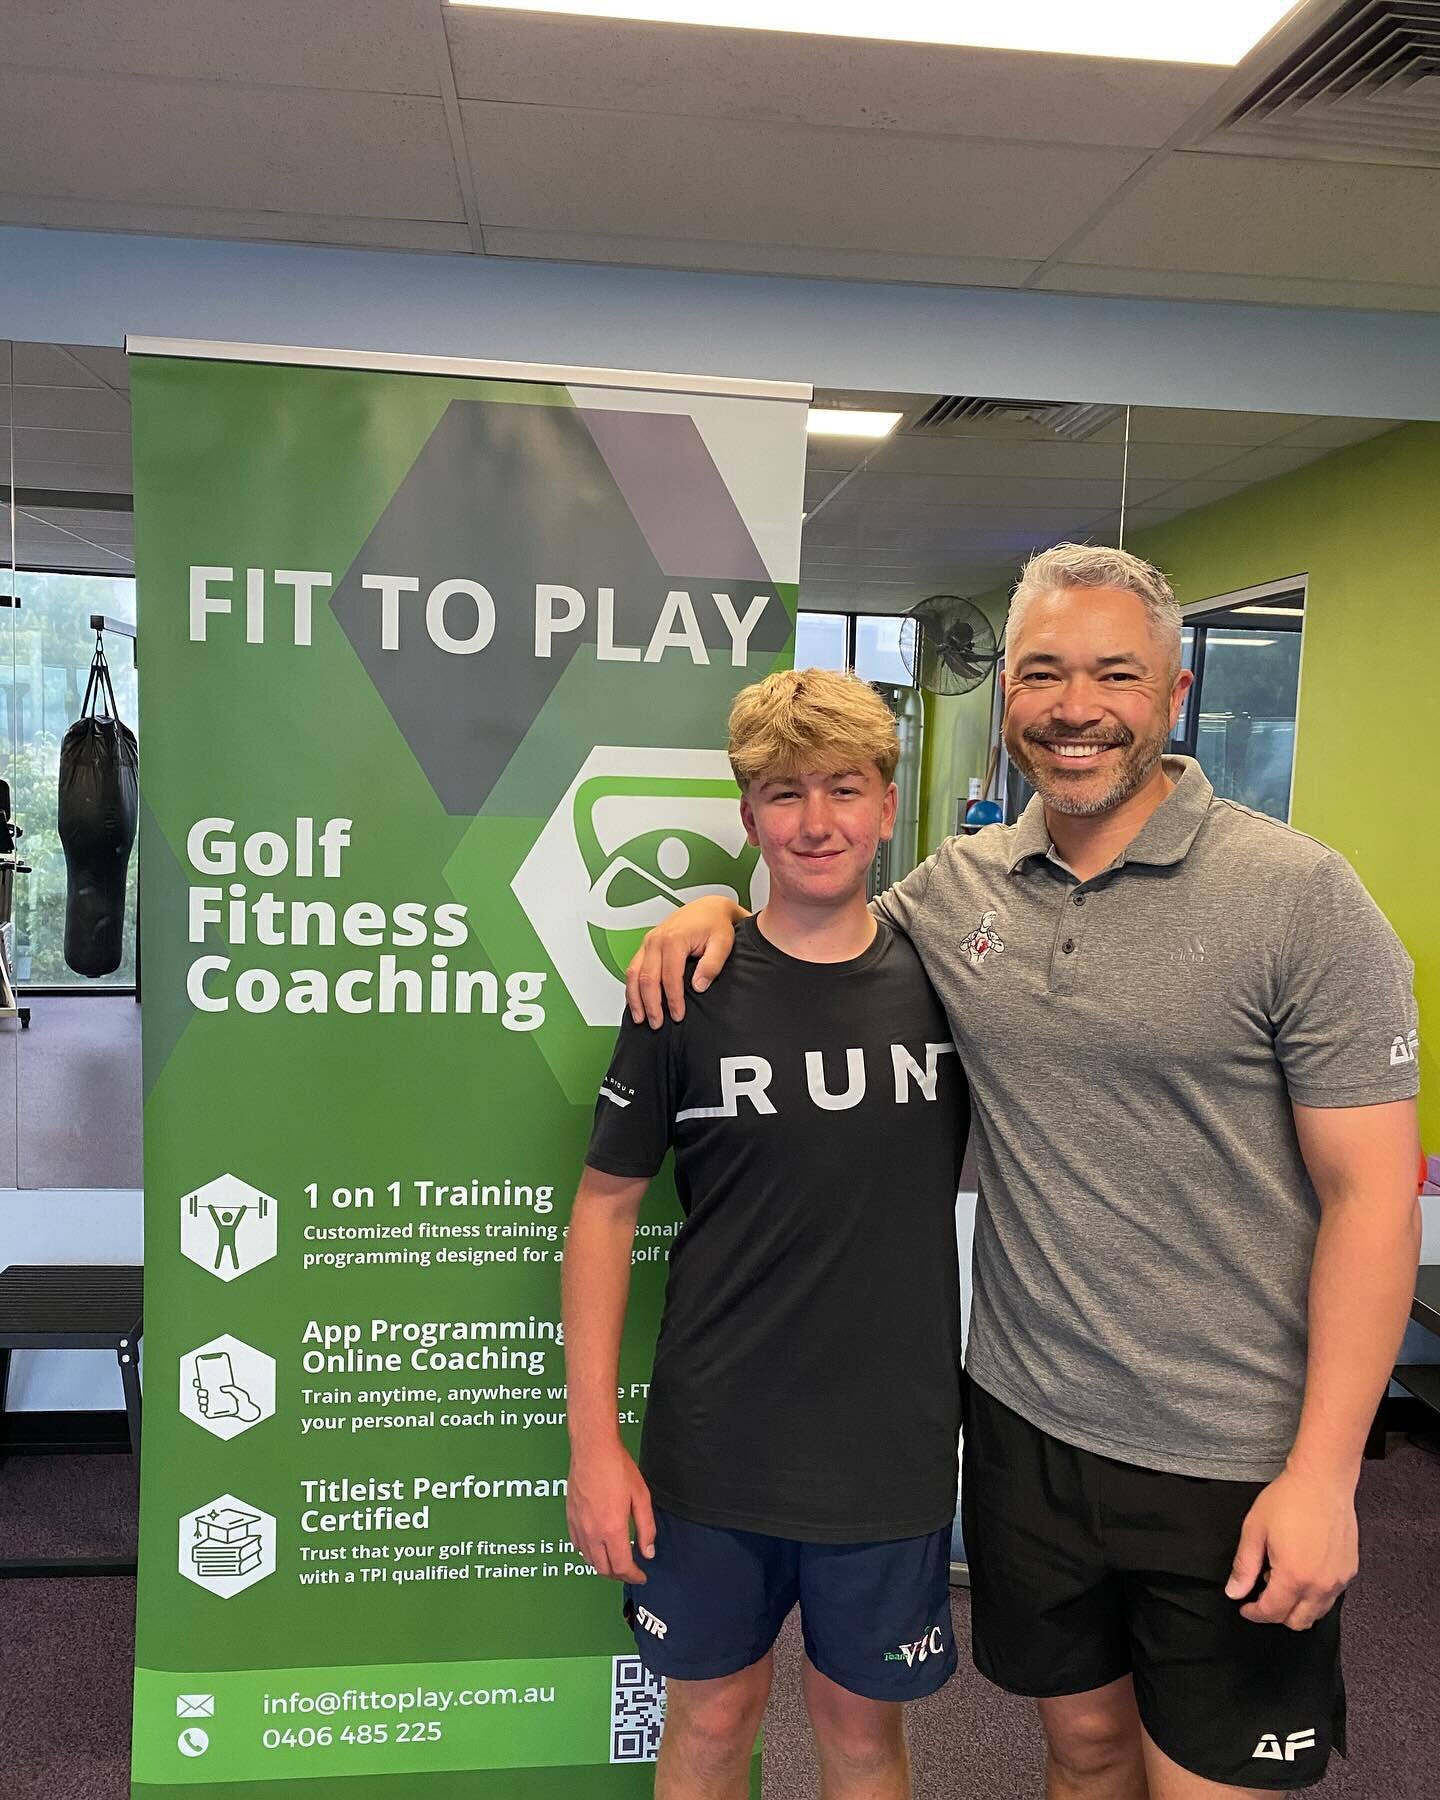 Known this young man since back in the old @sanctuarylakesgolfclub days. 

Been working with @taegendodds for the past few months getting his body back and working at his full golf potential. 

With the assistance of @golfperformance.osteo we&rsquo;v